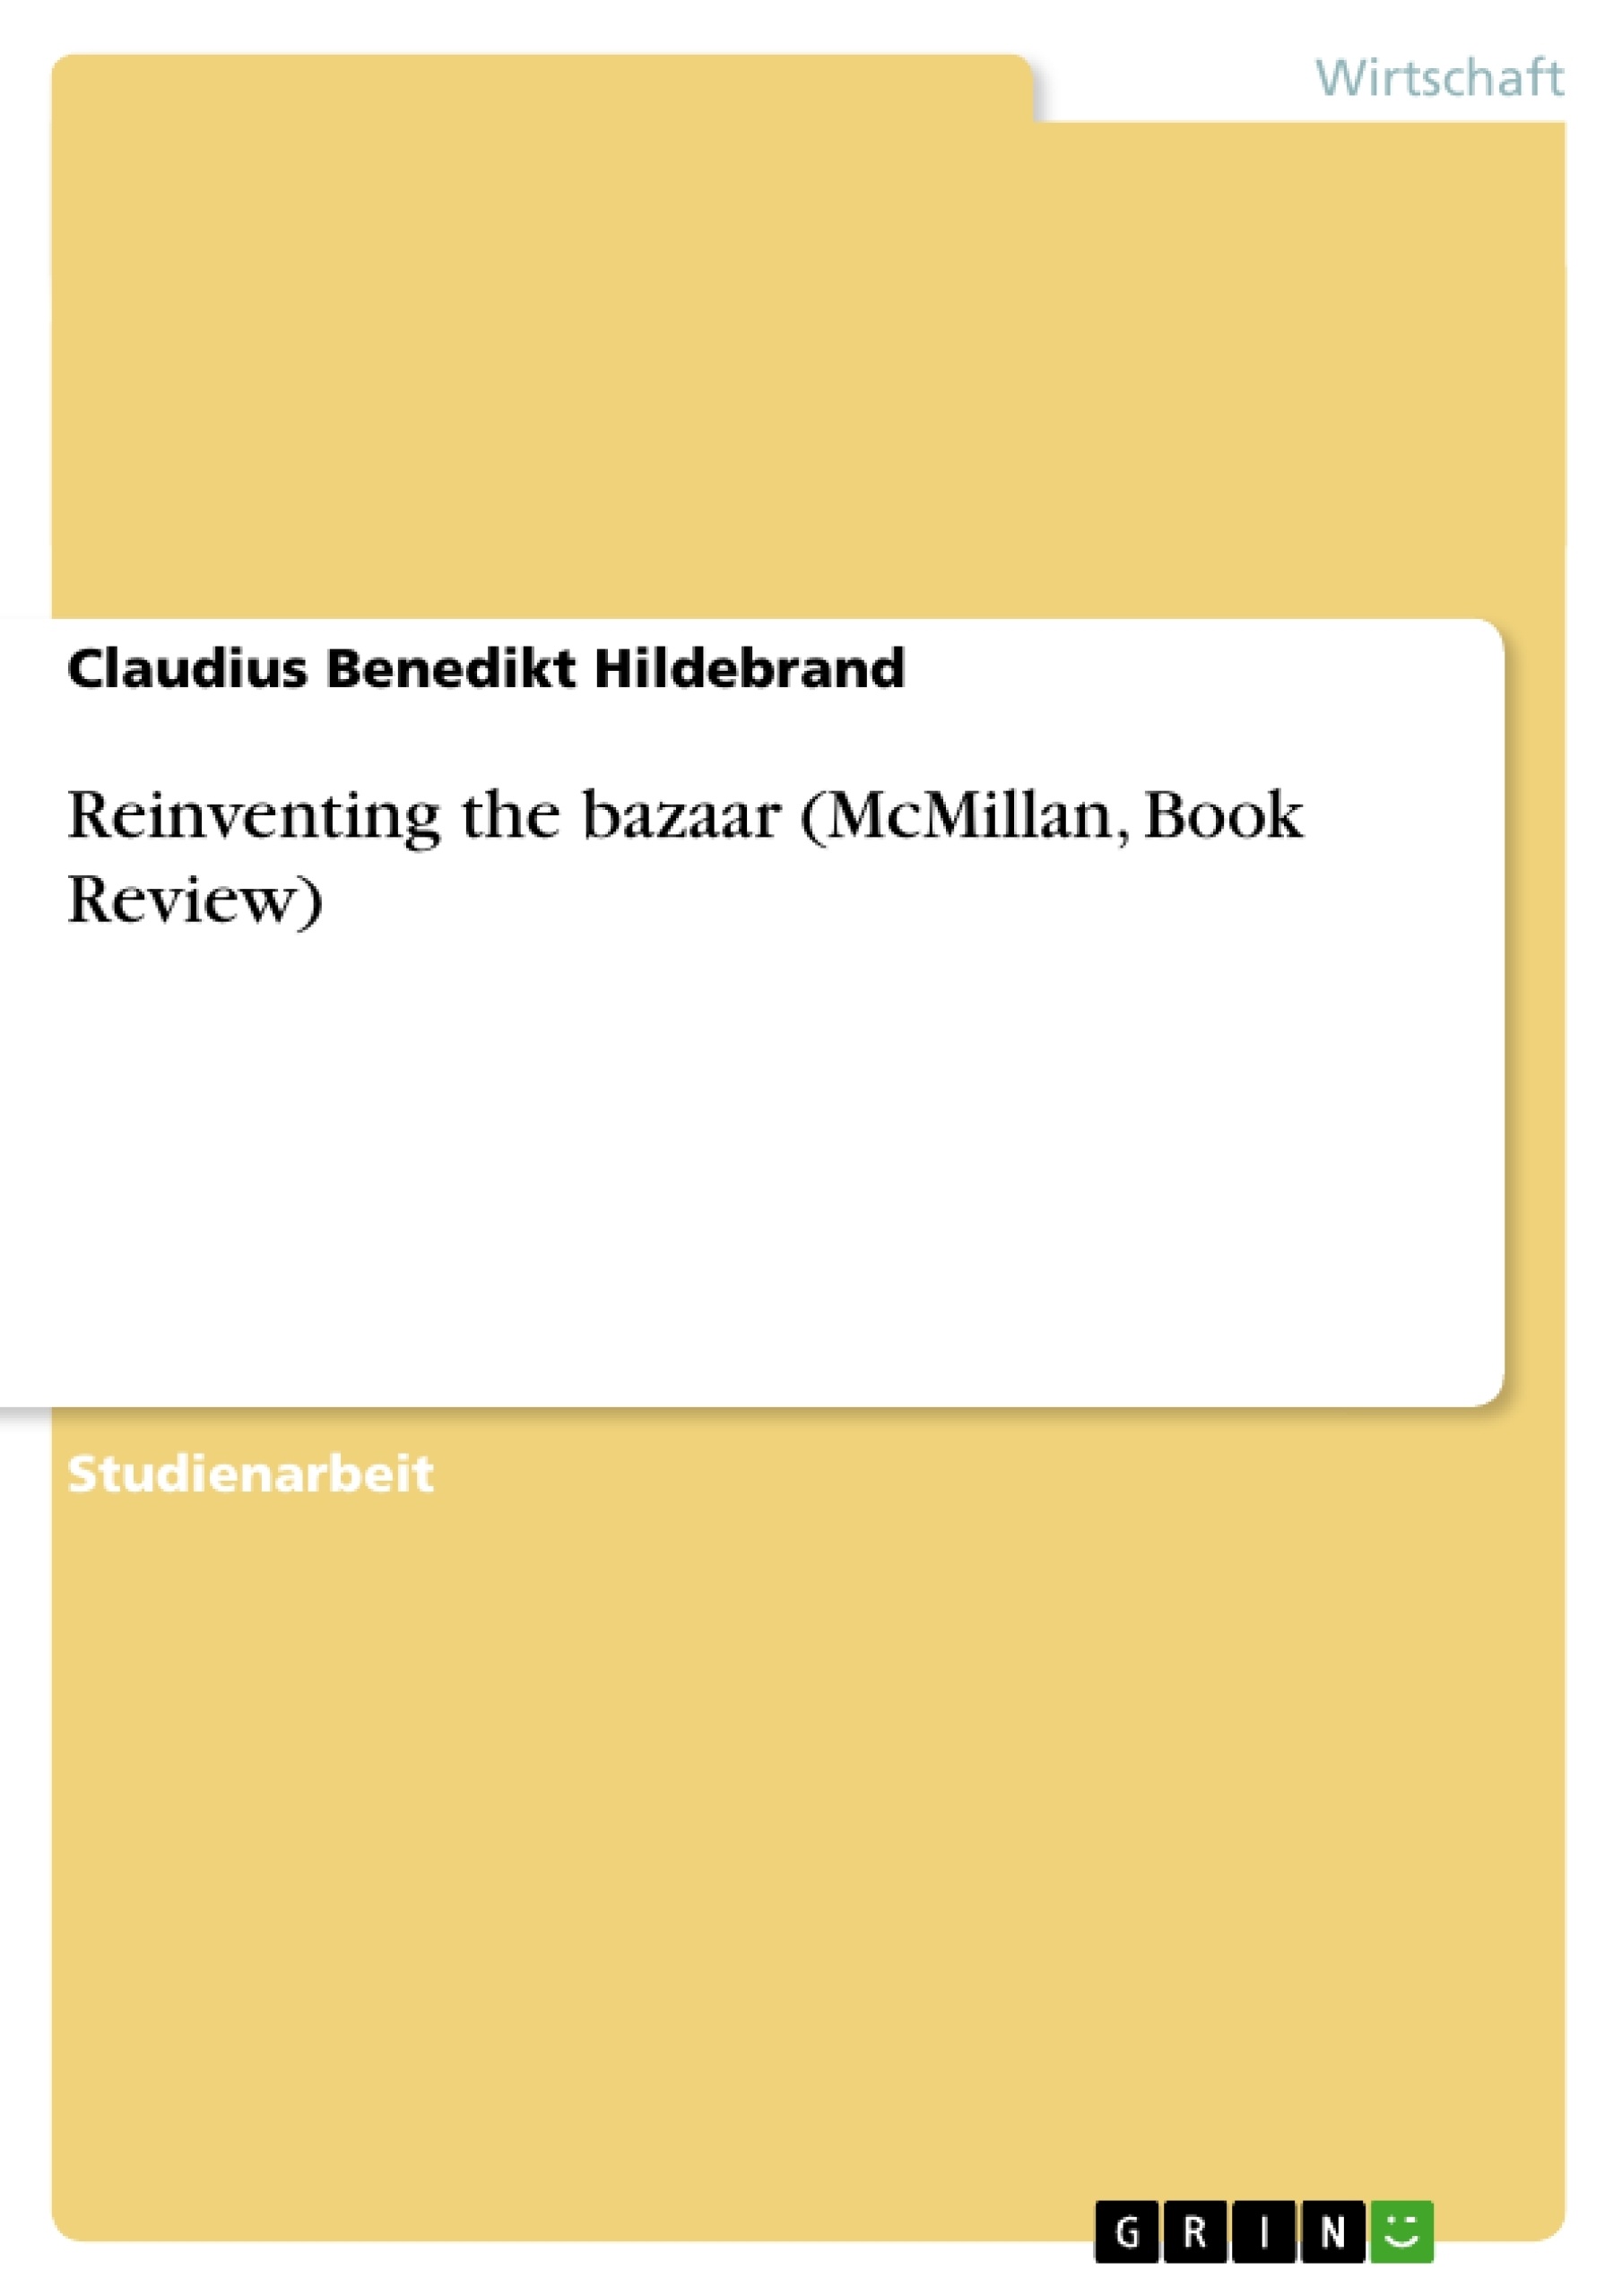 Título: Reinventing the bazaar (McMillan, Book Review)